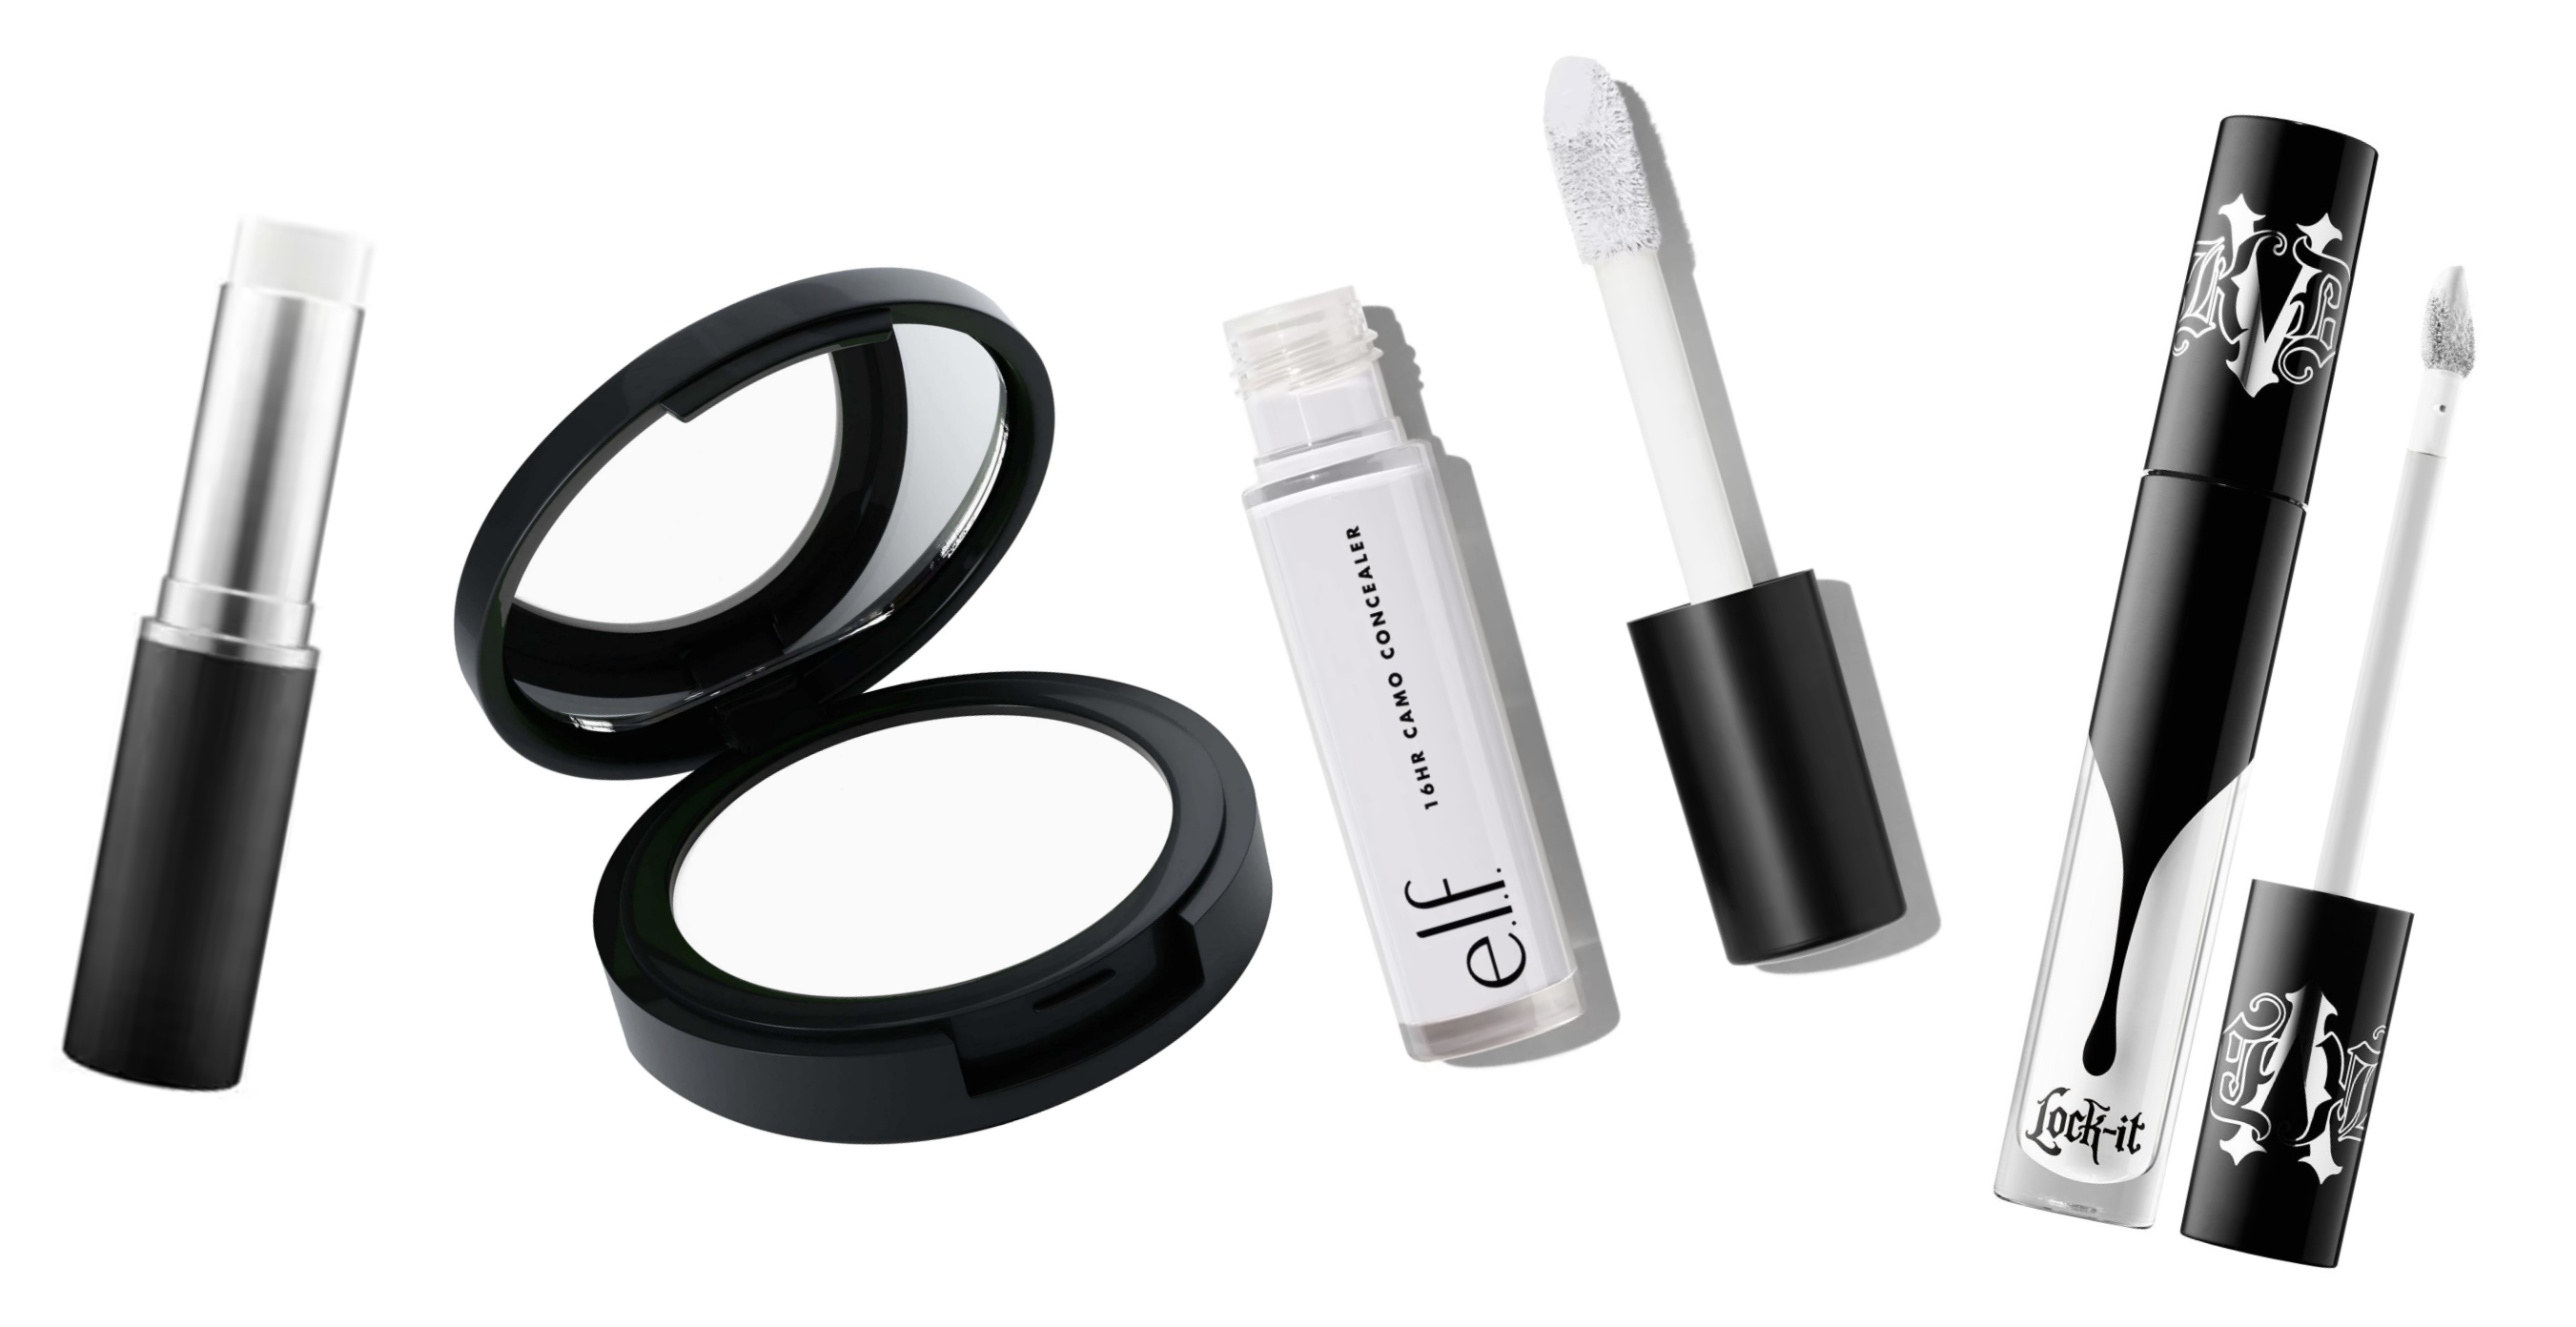 Glitter Magazine  4 White Concealers You Need for a Lifted Under-Eye